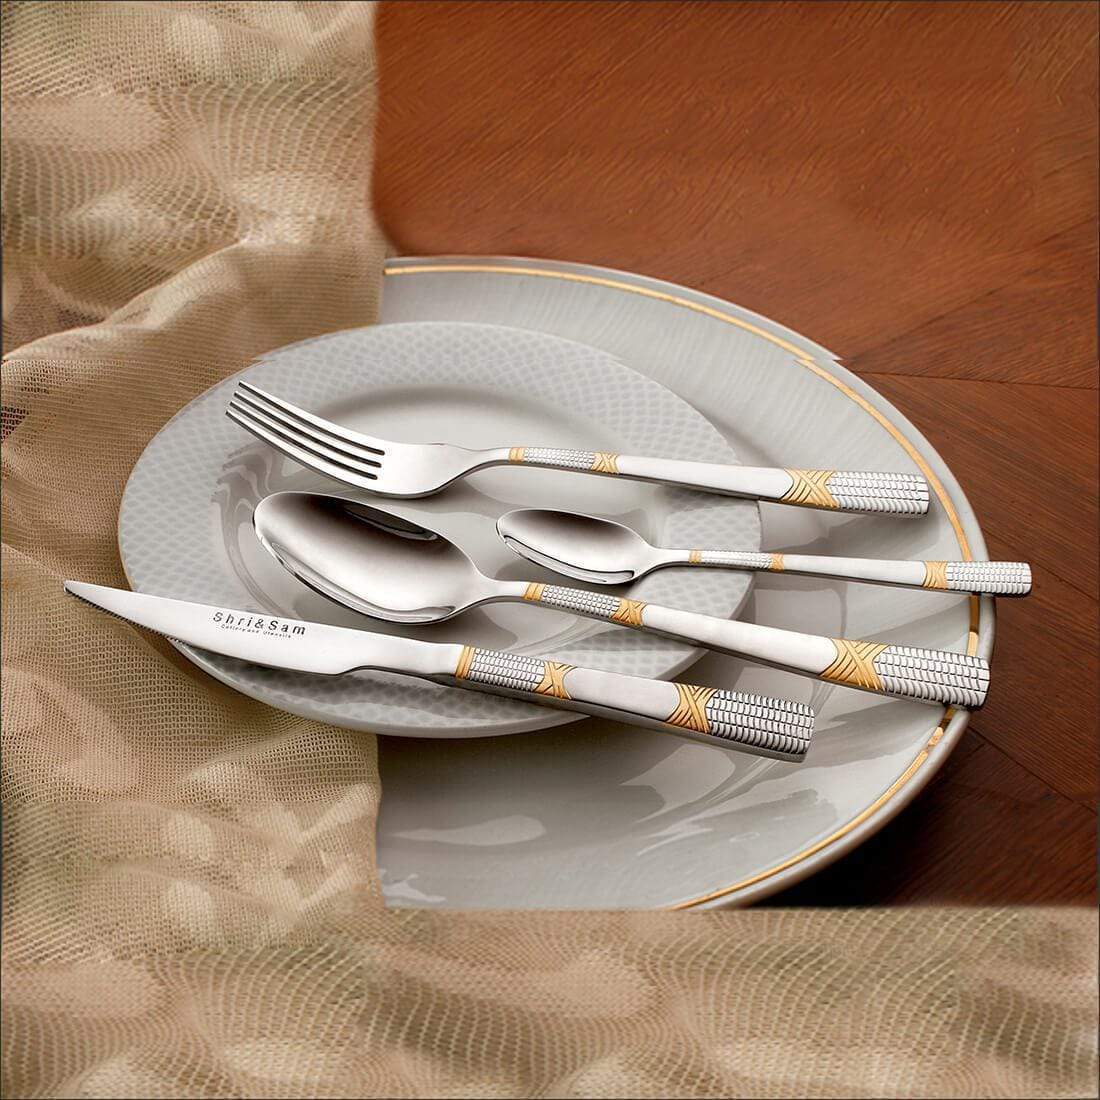 Clean your Stainless Steel Cutlery